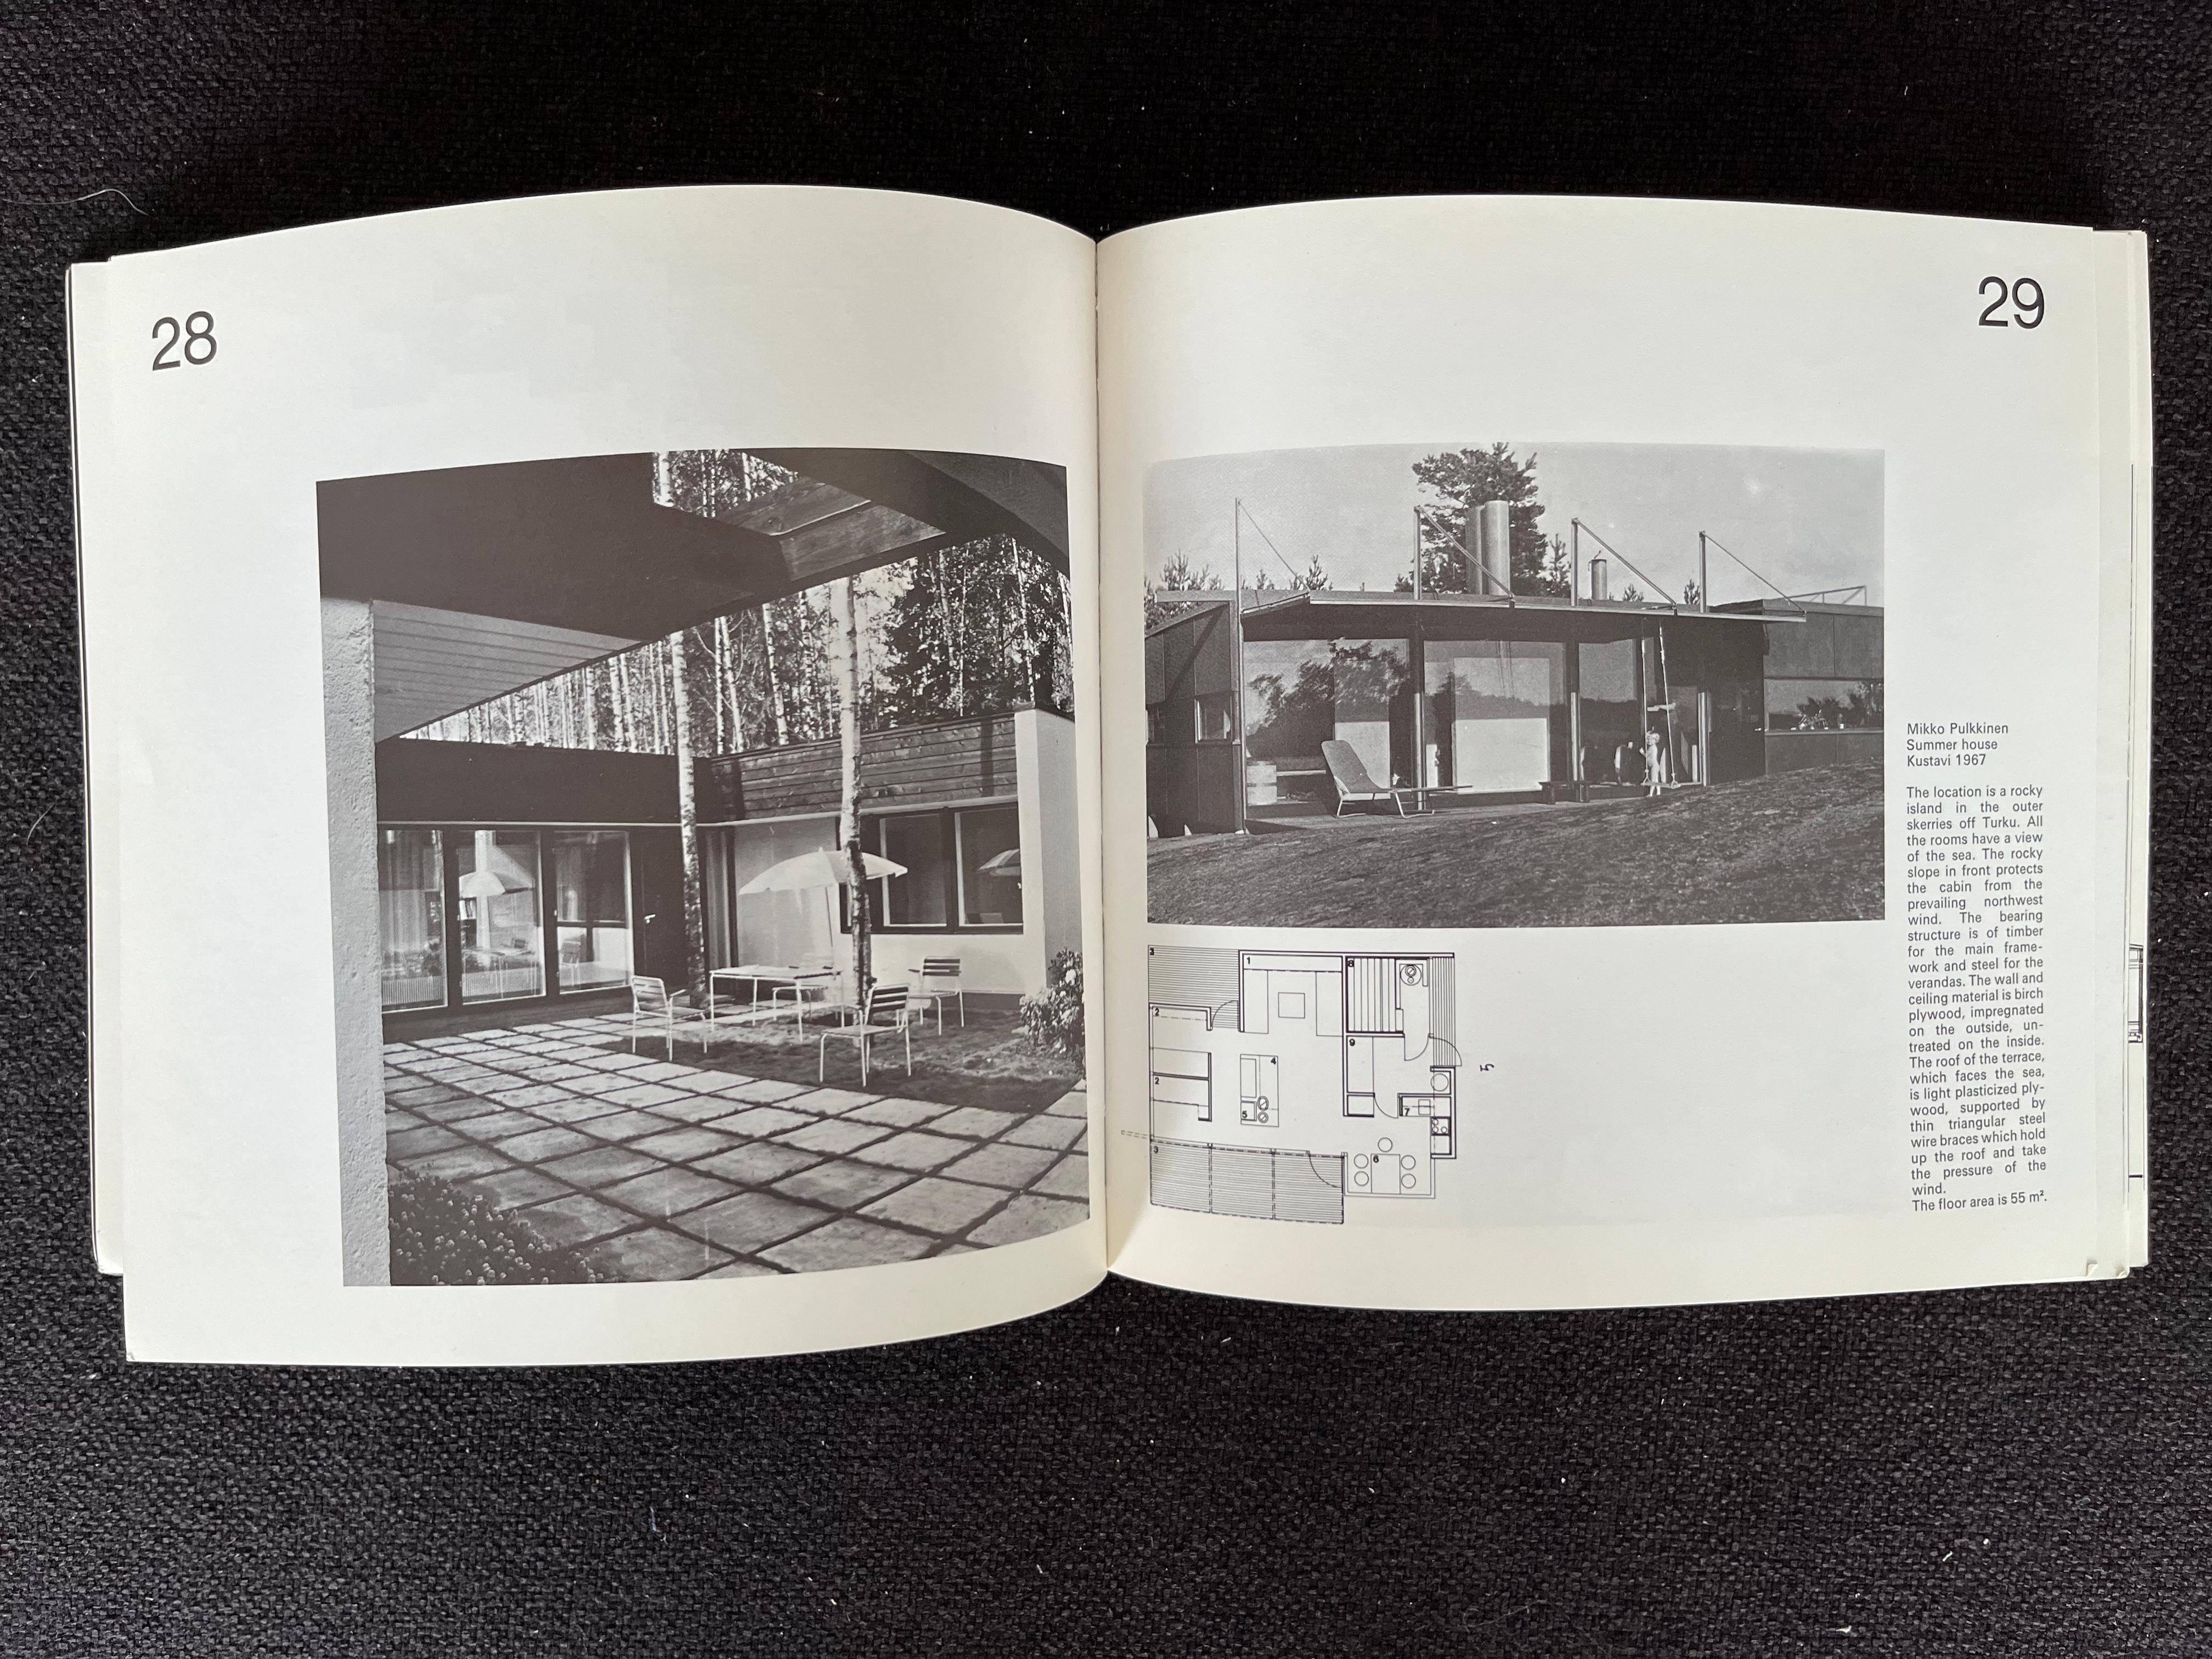 - 1975
- Exhibition of the finnish architecture
- The museum of finnish architecture and Netherlands congress centre
- good original condition
- many pictures inc.interior furniture by Alvar Aalto
- jr.